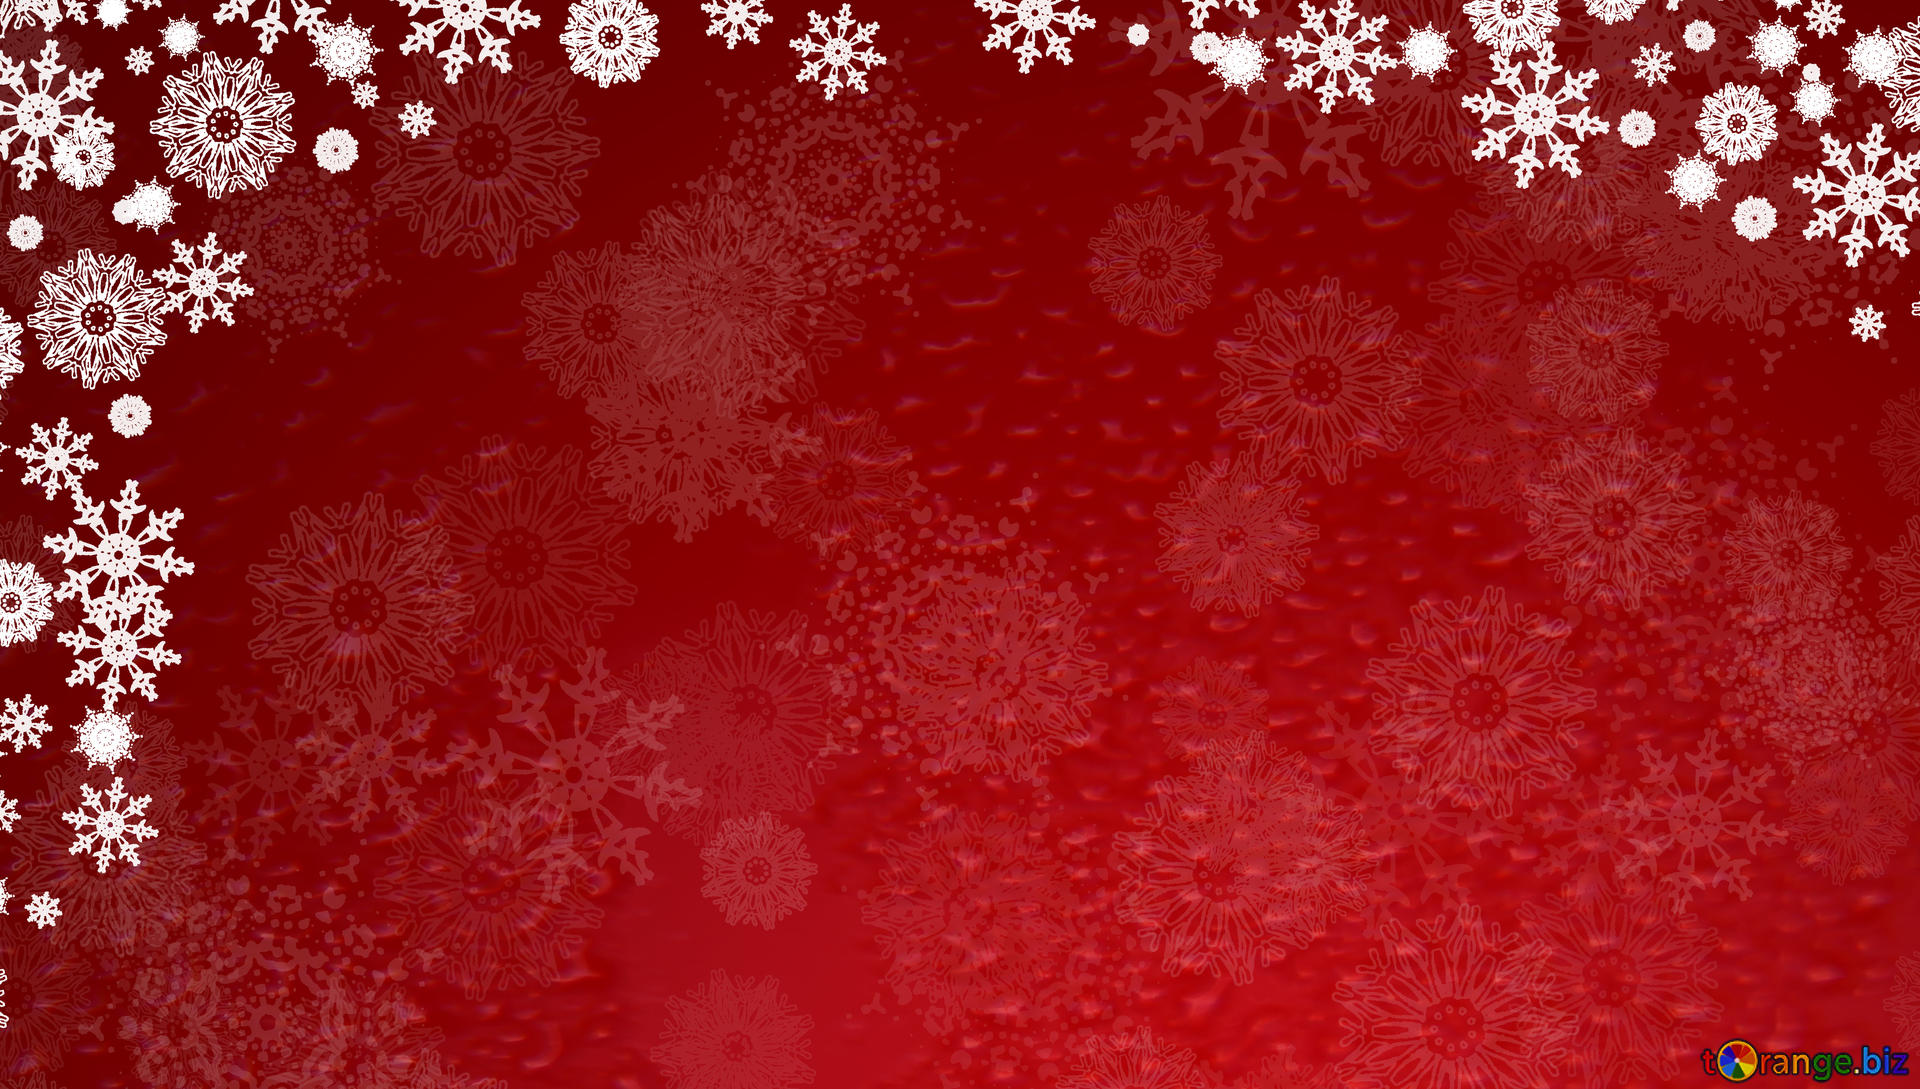 Picture Cover Red Christmas Background On Cc By